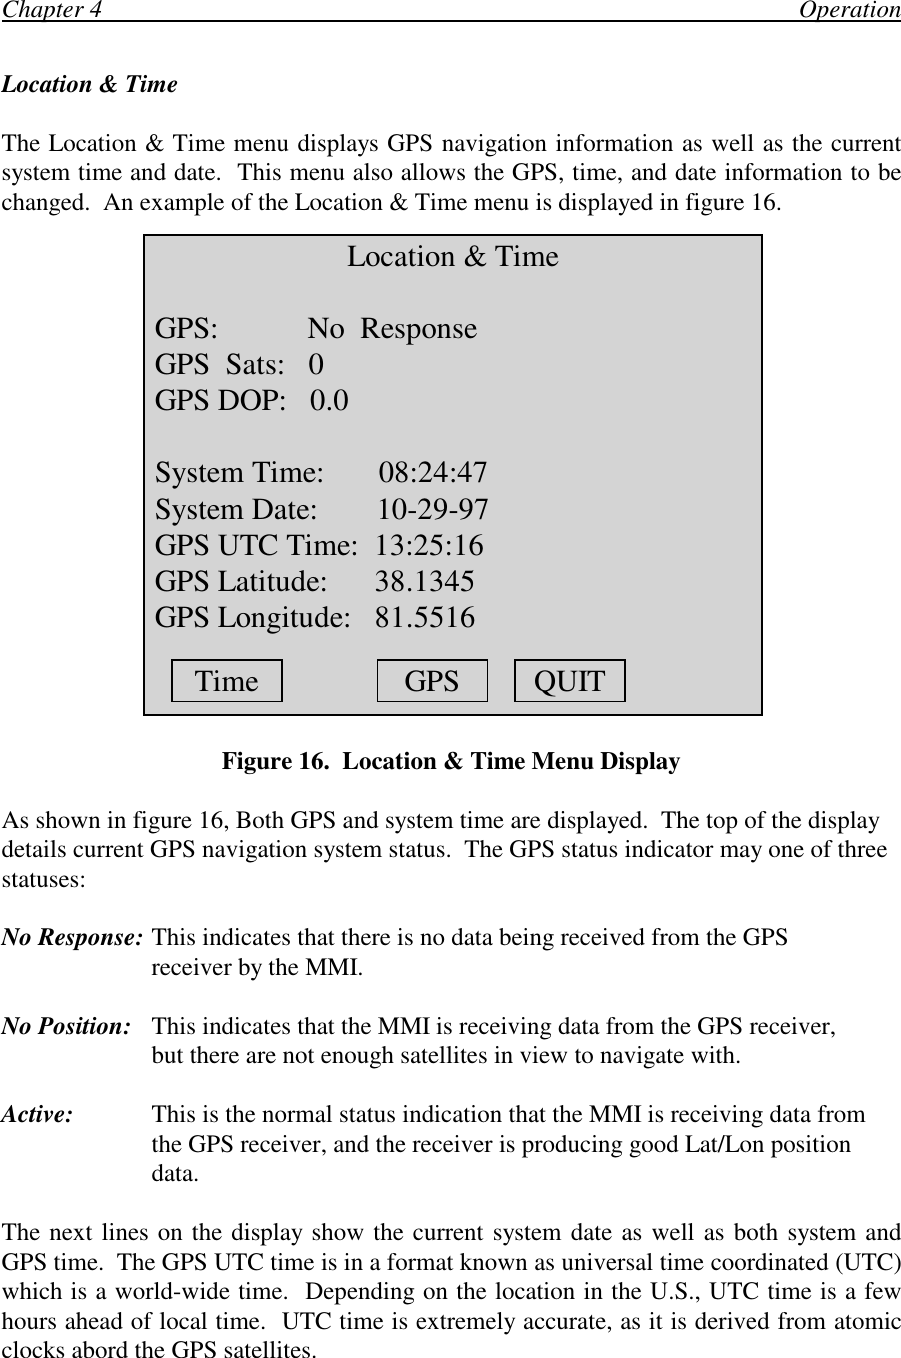 Chapter 4                                                                                                                OperationLocation &amp; TimeThe Location &amp; Time menu displays GPS navigation information as well as the currentsystem time and date.  This menu also allows the GPS, time, and date information to bechanged.  An example of the Location &amp; Time menu is displayed in figure 16.Figure 16.  Location &amp; Time Menu DisplayAs shown in figure 16, Both GPS and system time are displayed.  The top of the displaydetails current GPS navigation system status.  The GPS status indicator may one of threestatuses:No Response: This indicates that there is no data being received from the GPSreceiver by the MMI.No Position: This indicates that the MMI is receiving data from the GPS receiver,but there are not enough satellites in view to navigate with.Active: This is the normal status indication that the MMI is receiving data fromthe GPS receiver, and the receiver is producing good Lat/Lon positiondata.The next lines on the display show the current system date as well as both system andGPS time.  The GPS UTC time is in a format known as universal time coordinated (UTC)which is a world-wide time.  Depending on the location in the U.S., UTC time is a fewhours ahead of local time.  UTC time is extremely accurate, as it is derived from atomicclocks abord the GPS satellites.Location &amp; Time GPS:     No  Response GPS  Sats:   0 GPS DOP:   0.0 System Time:       08:24:47 System Date:    10-29-97 GPS UTC Time:  13:25:16 GPS Latitude:      38.1345 GPS Longitude:   81.5516Time GPS QUIT